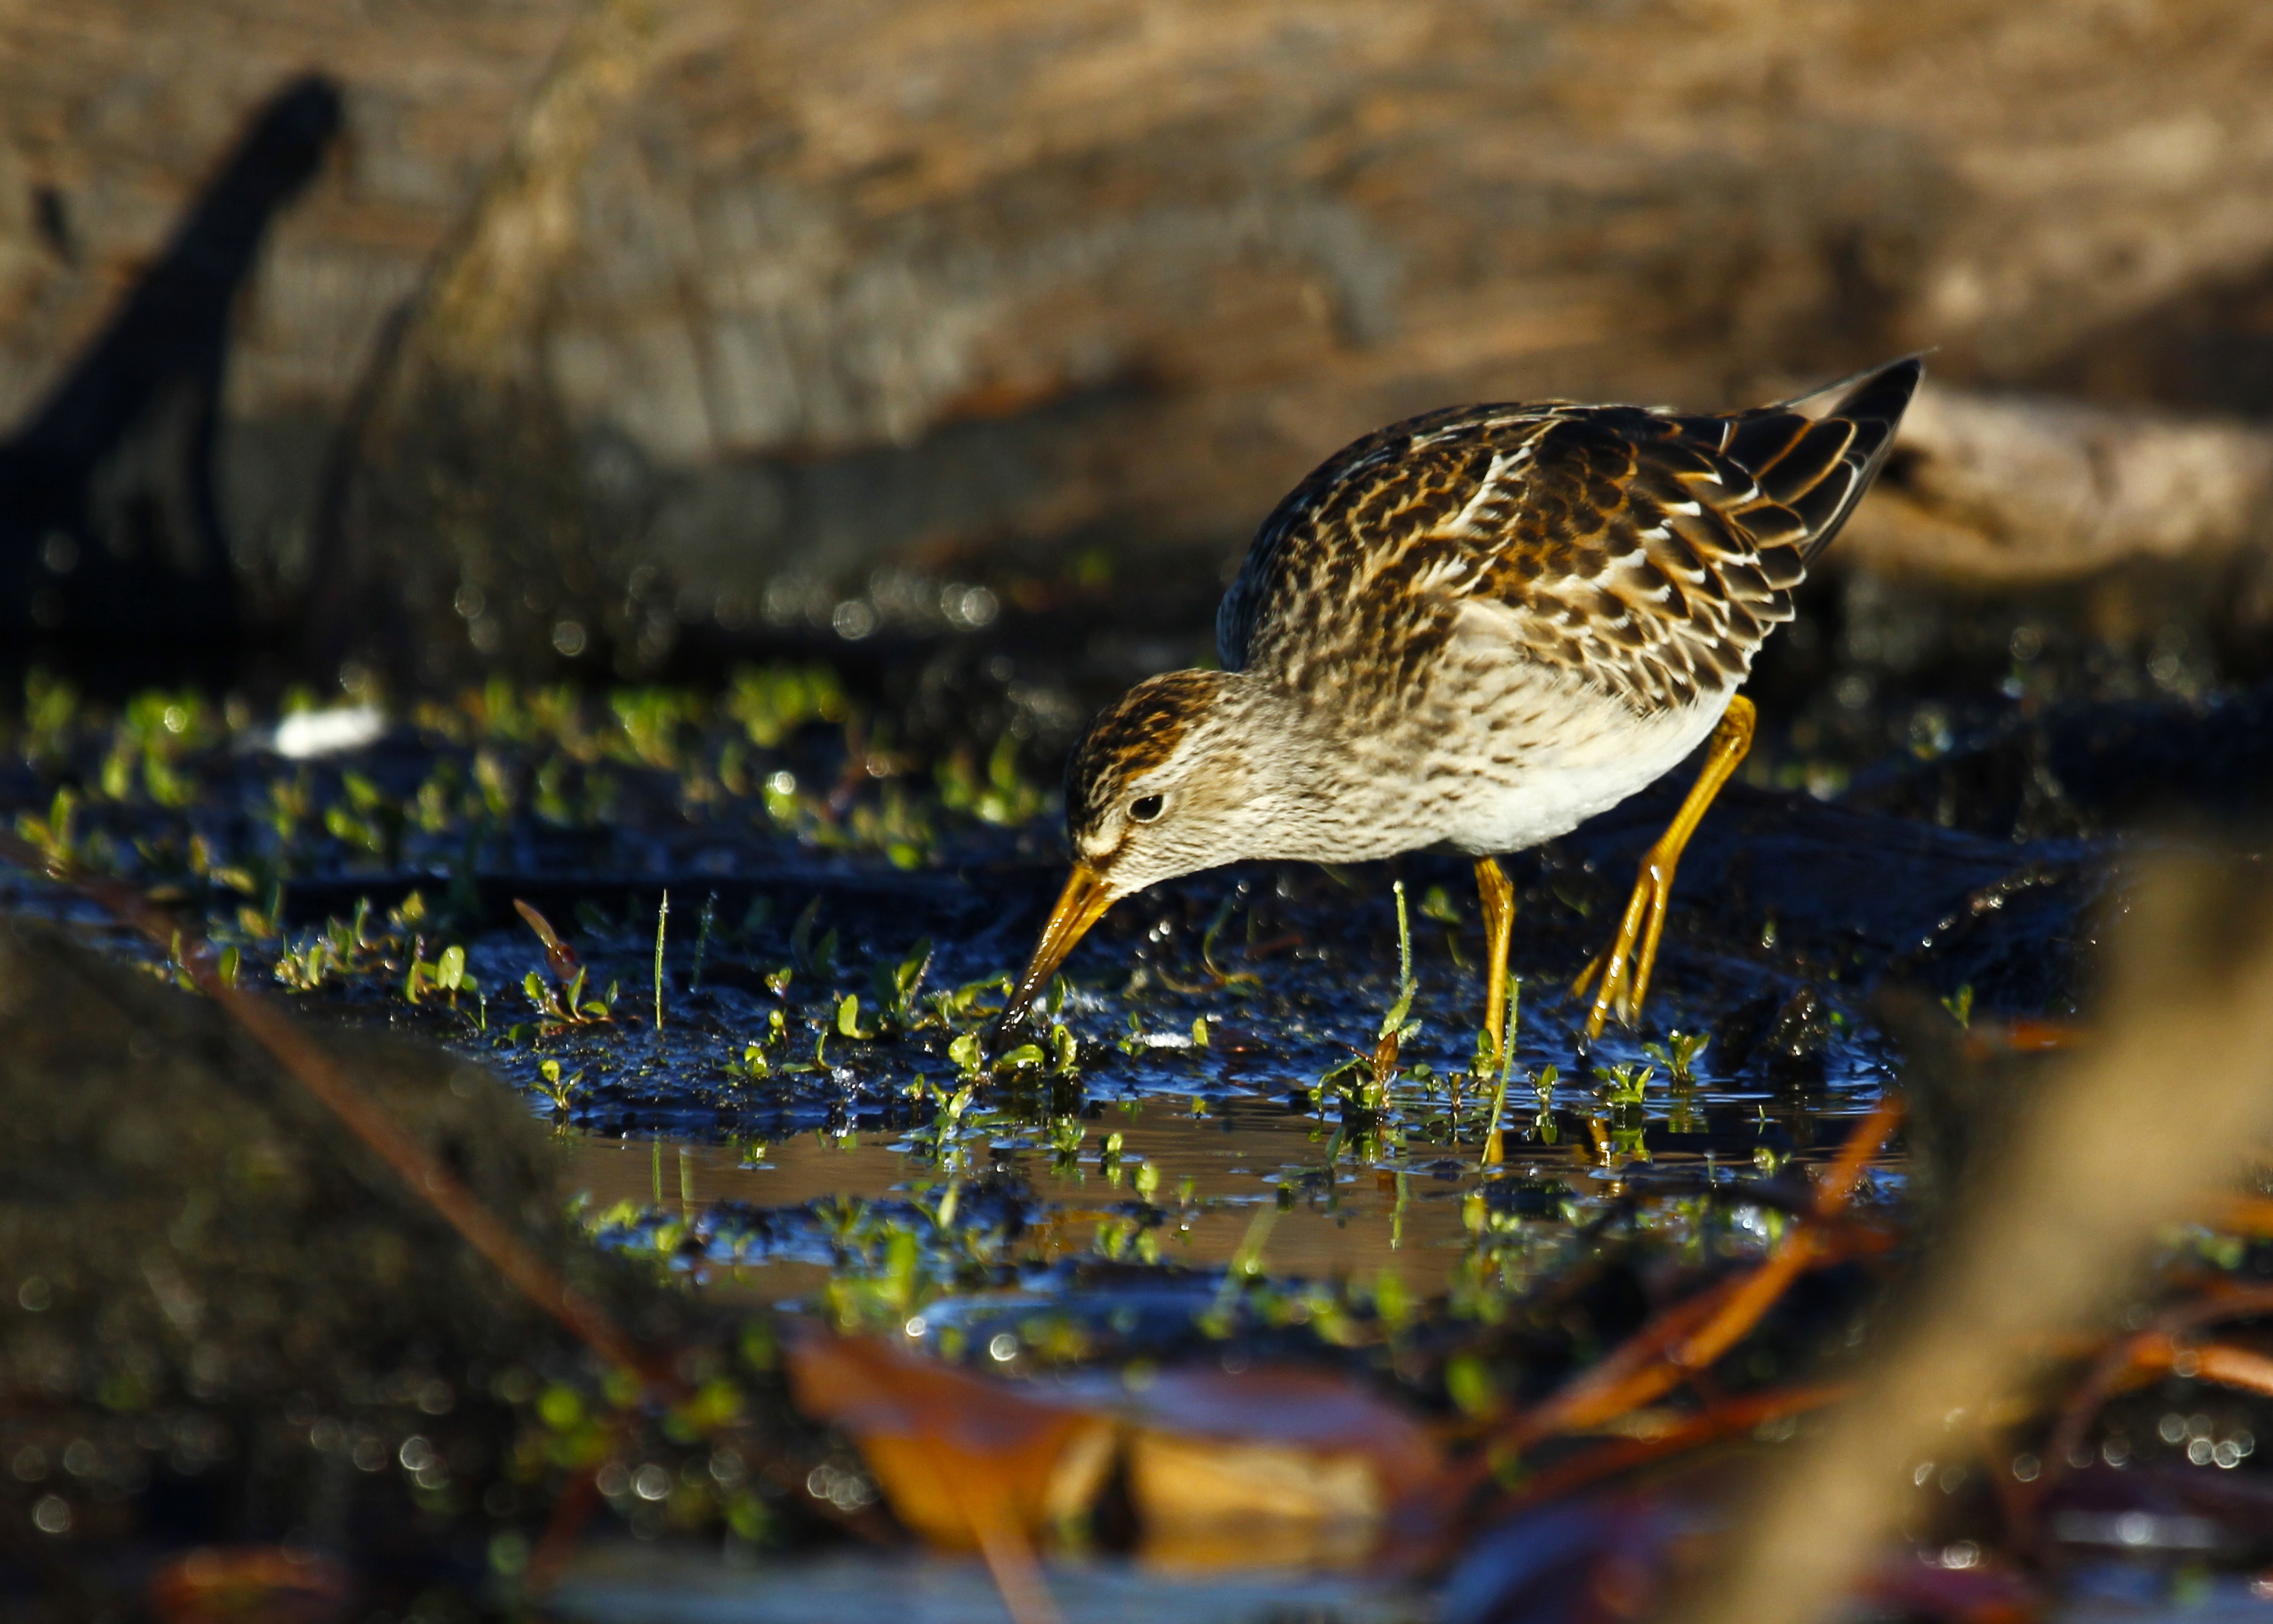 Here's one more of the Pectoral Sandpiper, Morningside Park, 9/29/13.